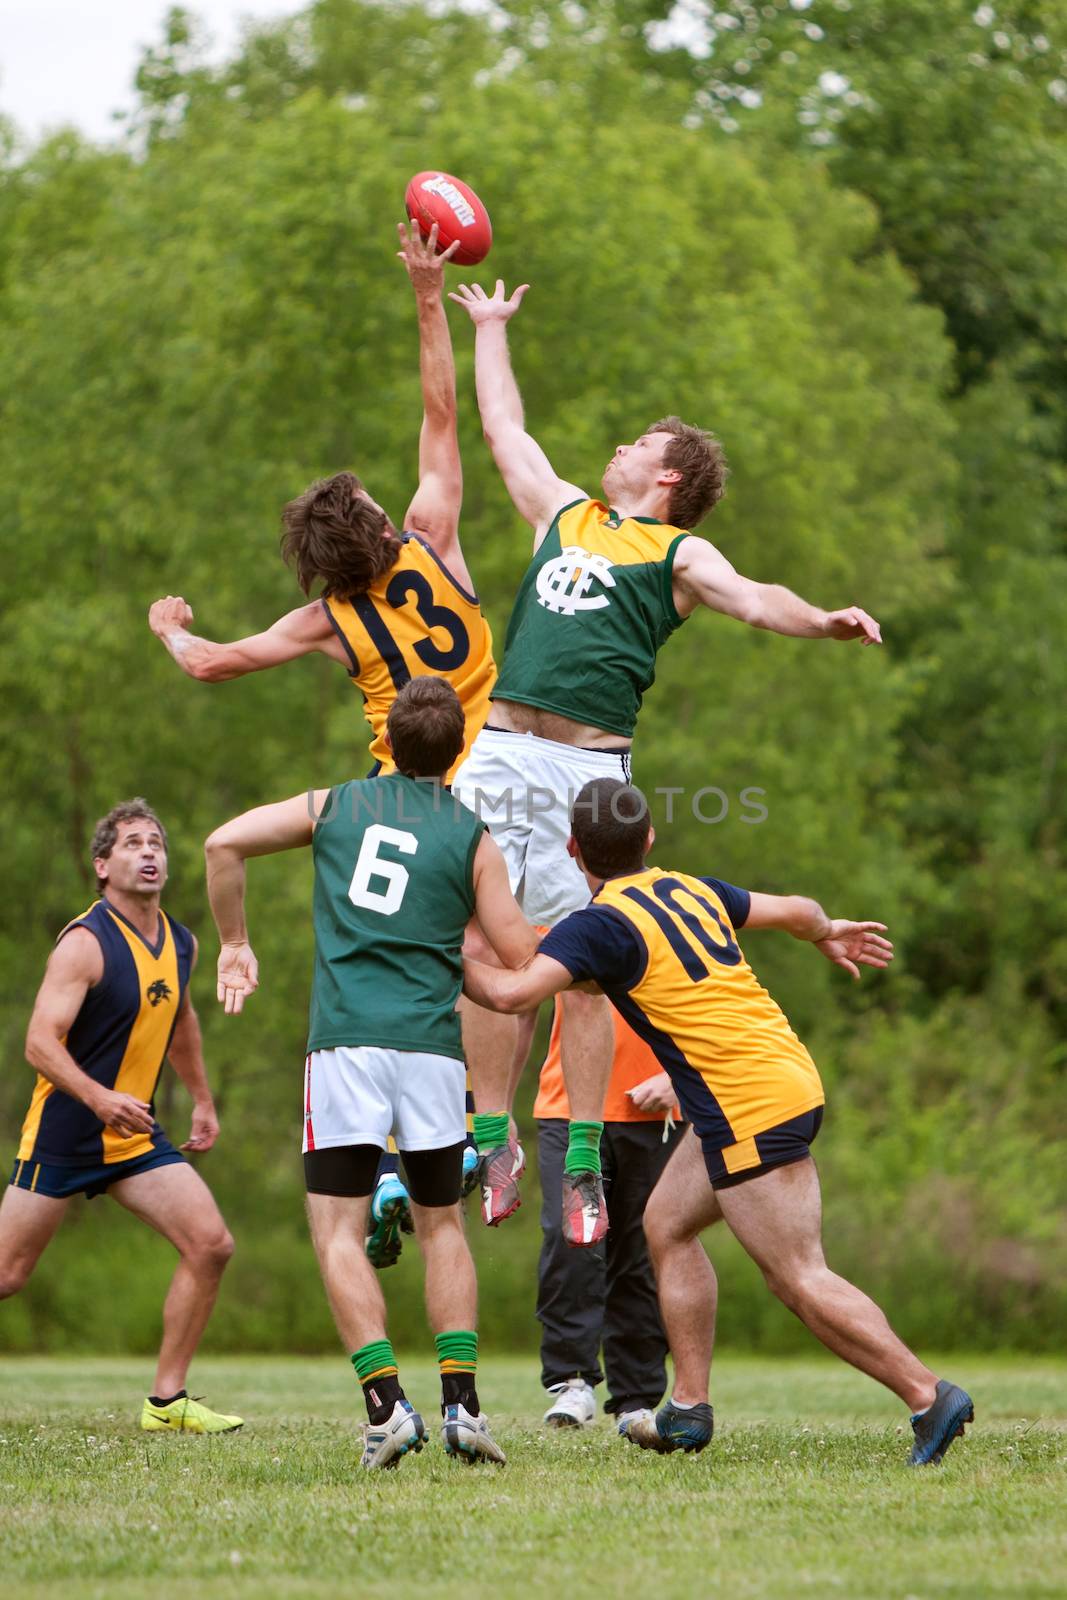 Roswell, GA, USA - May 17, 2014:  Club teams from Baton Rouge and Atlanta compete in an amateur game of Australian Rules Football in a Roswell city park.  